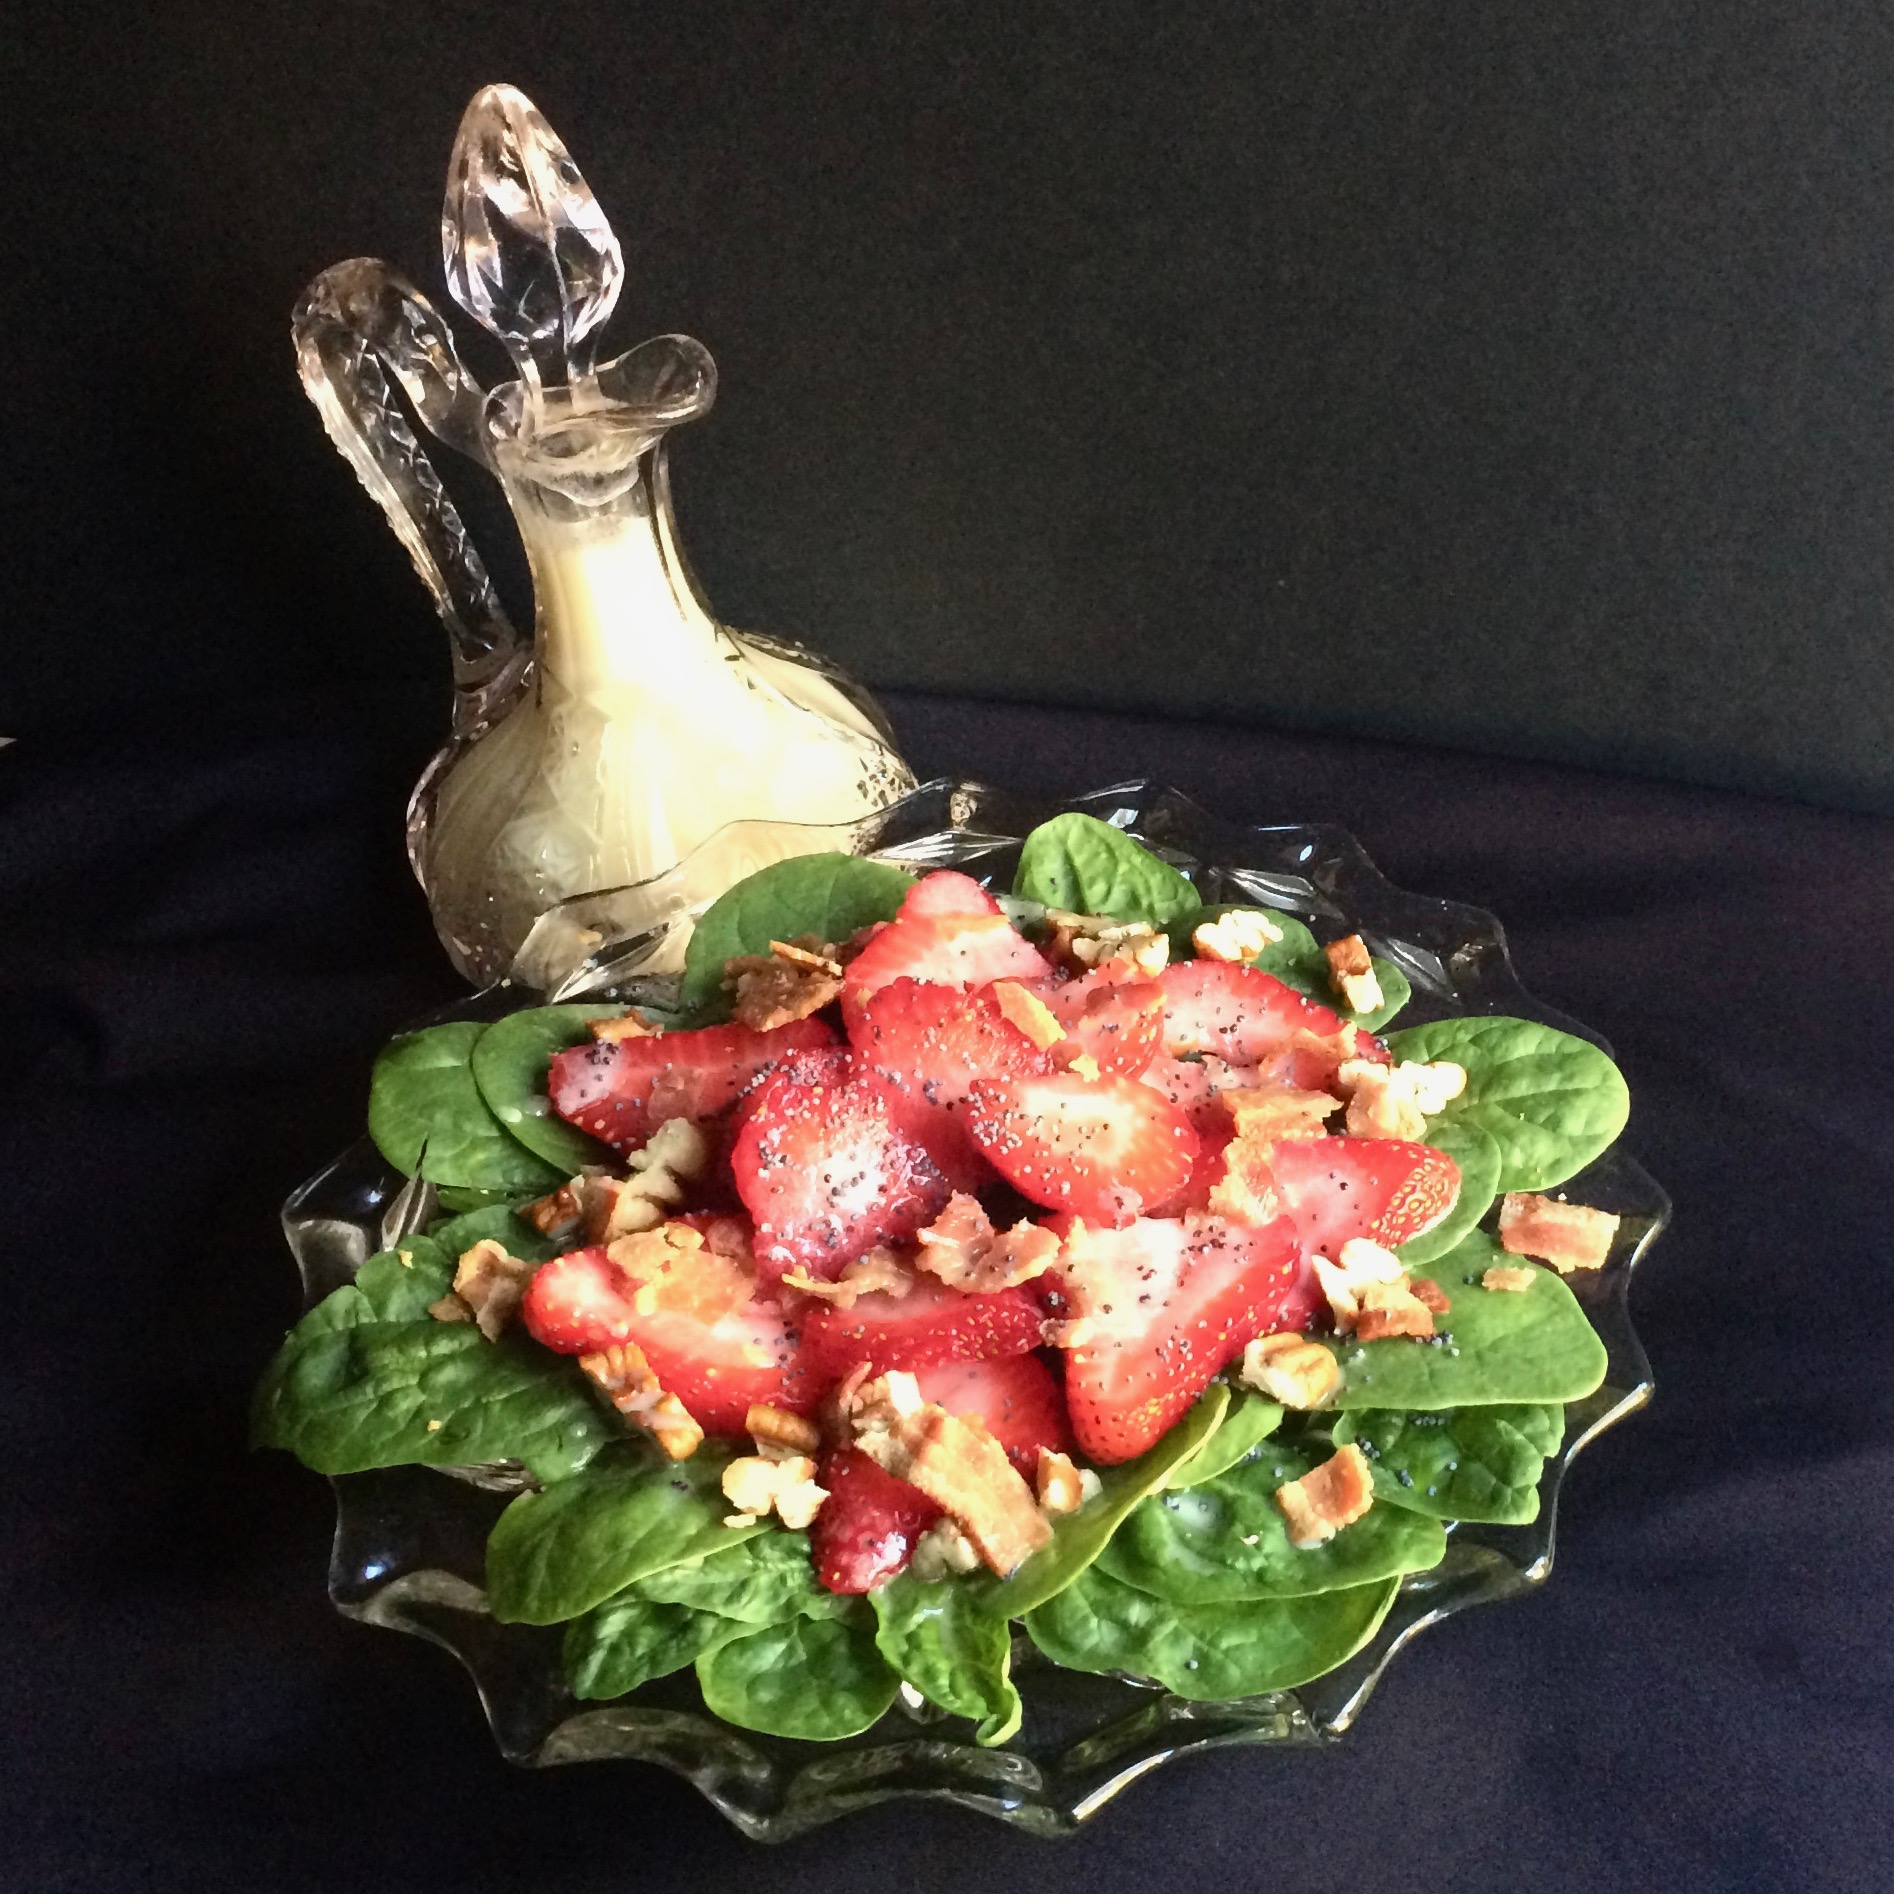 Strawberry and Spinach Salad with Honey-Poppy Seed Dressing